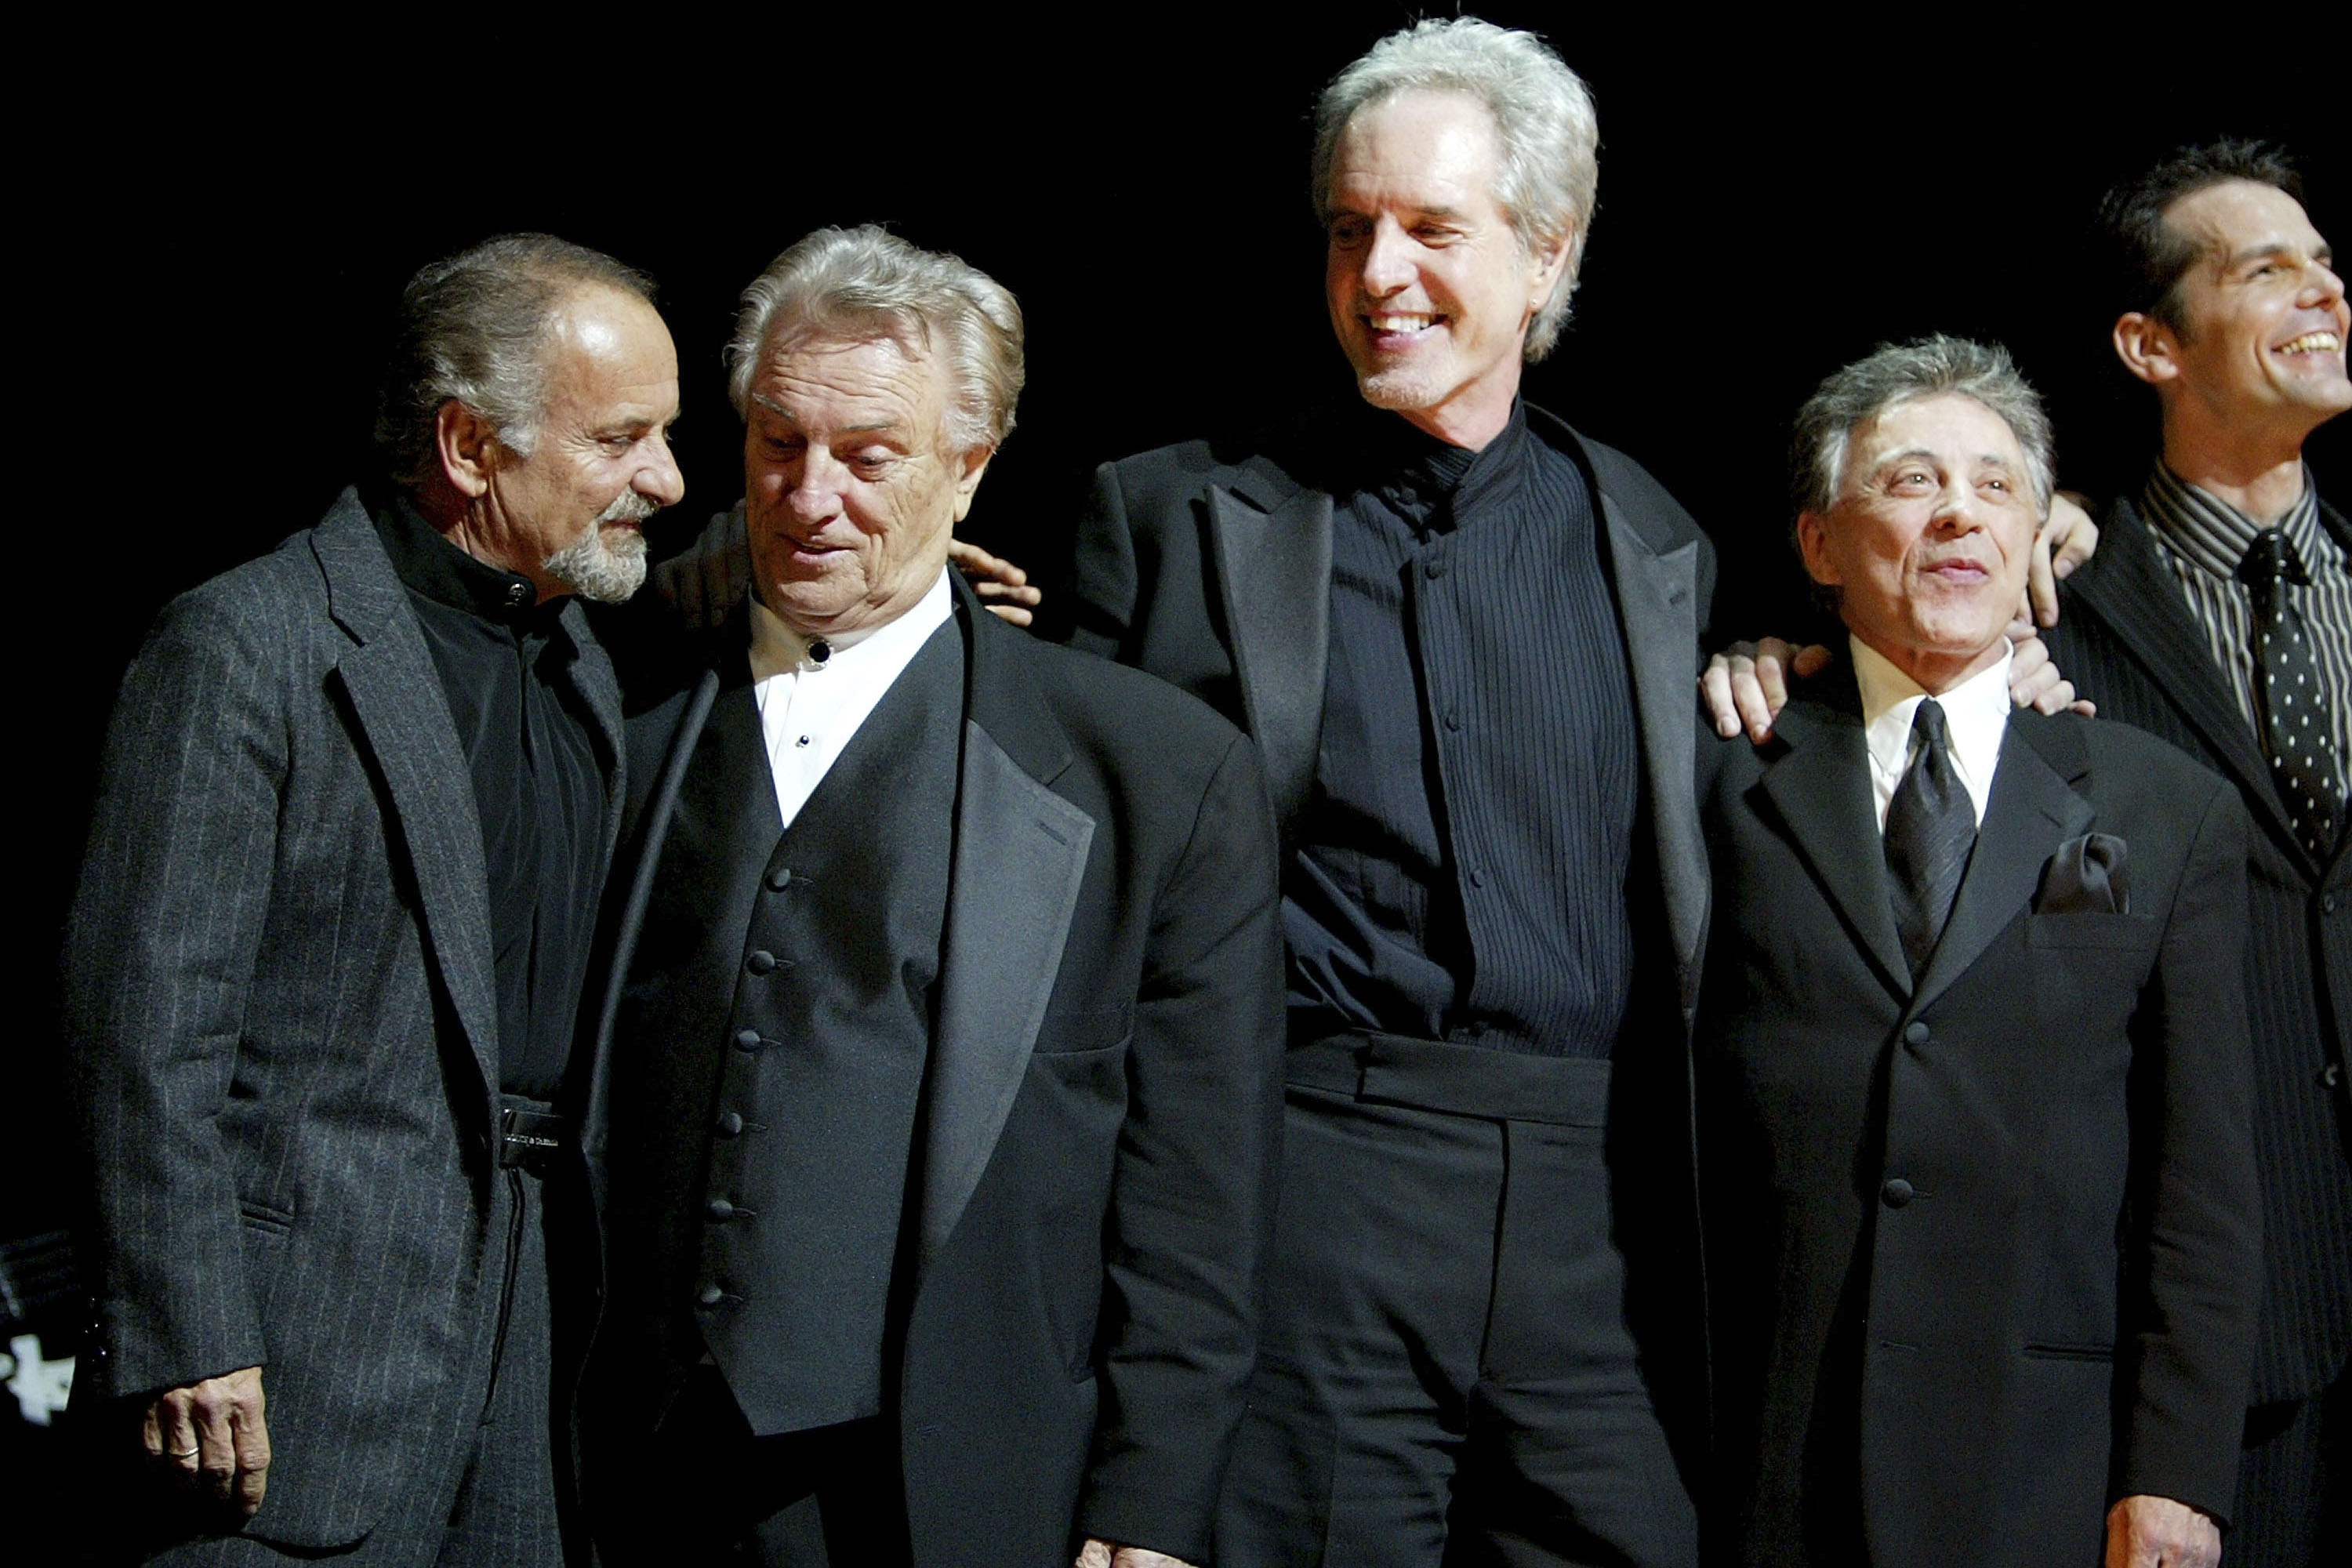 (L to R) Actor Joe Pesci joins Tommy DeVito, Bob Gaudio and Frankie Valli of Frankie Valli and the Four Seasons onstage during the curtain call at the play opening night of "Jersey Boys" on November 6, 2005 in New York City. (Paul Hawthorne&mdash;Getty Images)